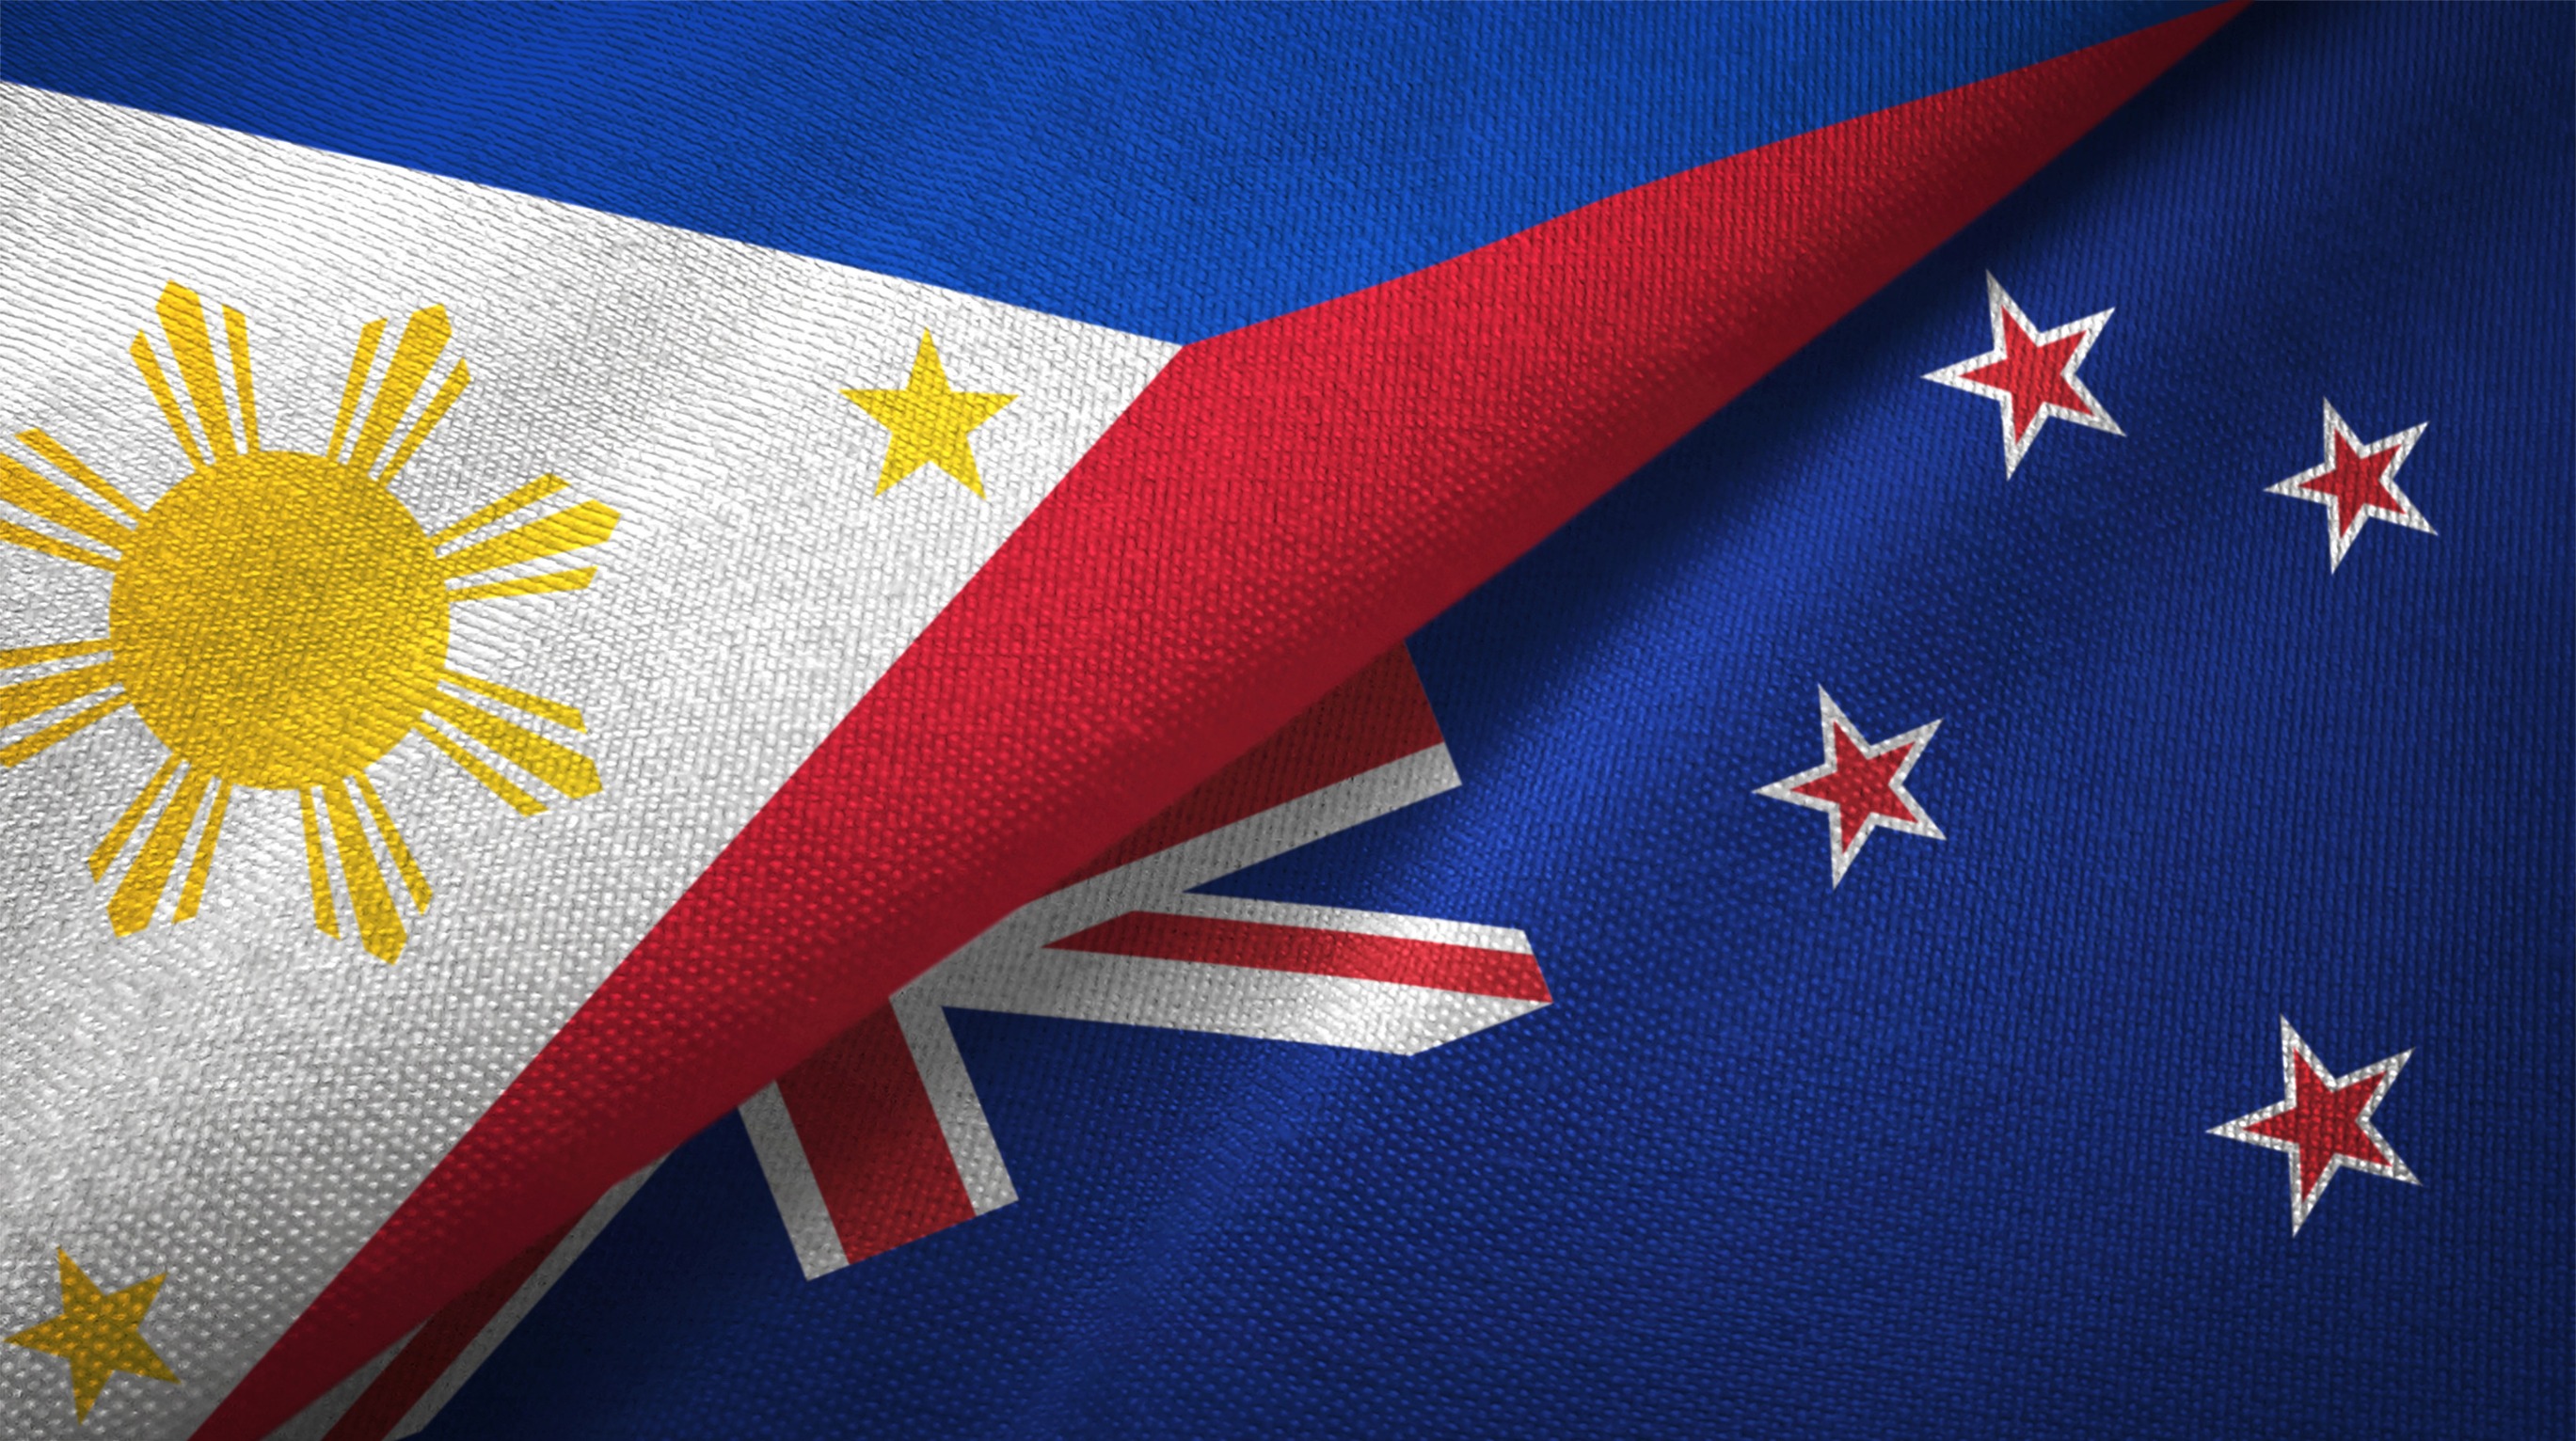 New Zealand Pinoys Working Holiday Visas Available March 12